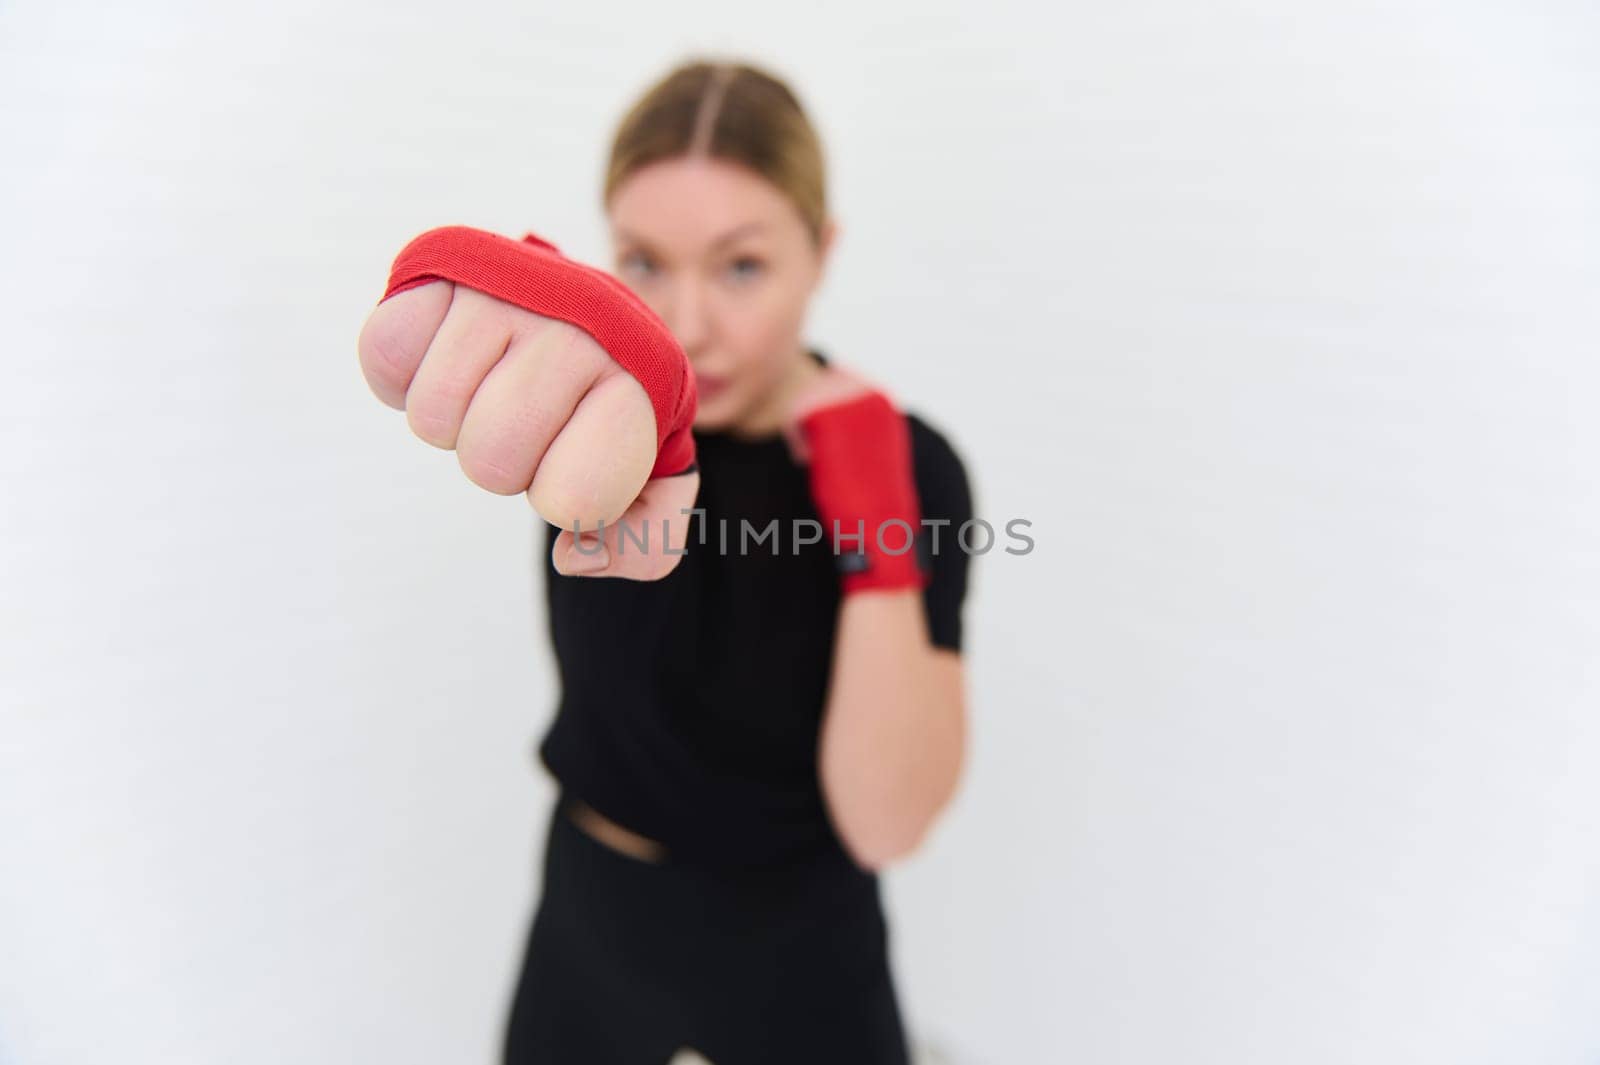 Selective focus on the fist of of a blurred young female boxer fighter in red boxing gloves, punching forward the camera, isolated over white background. Boxing training. Martial art. People and sport